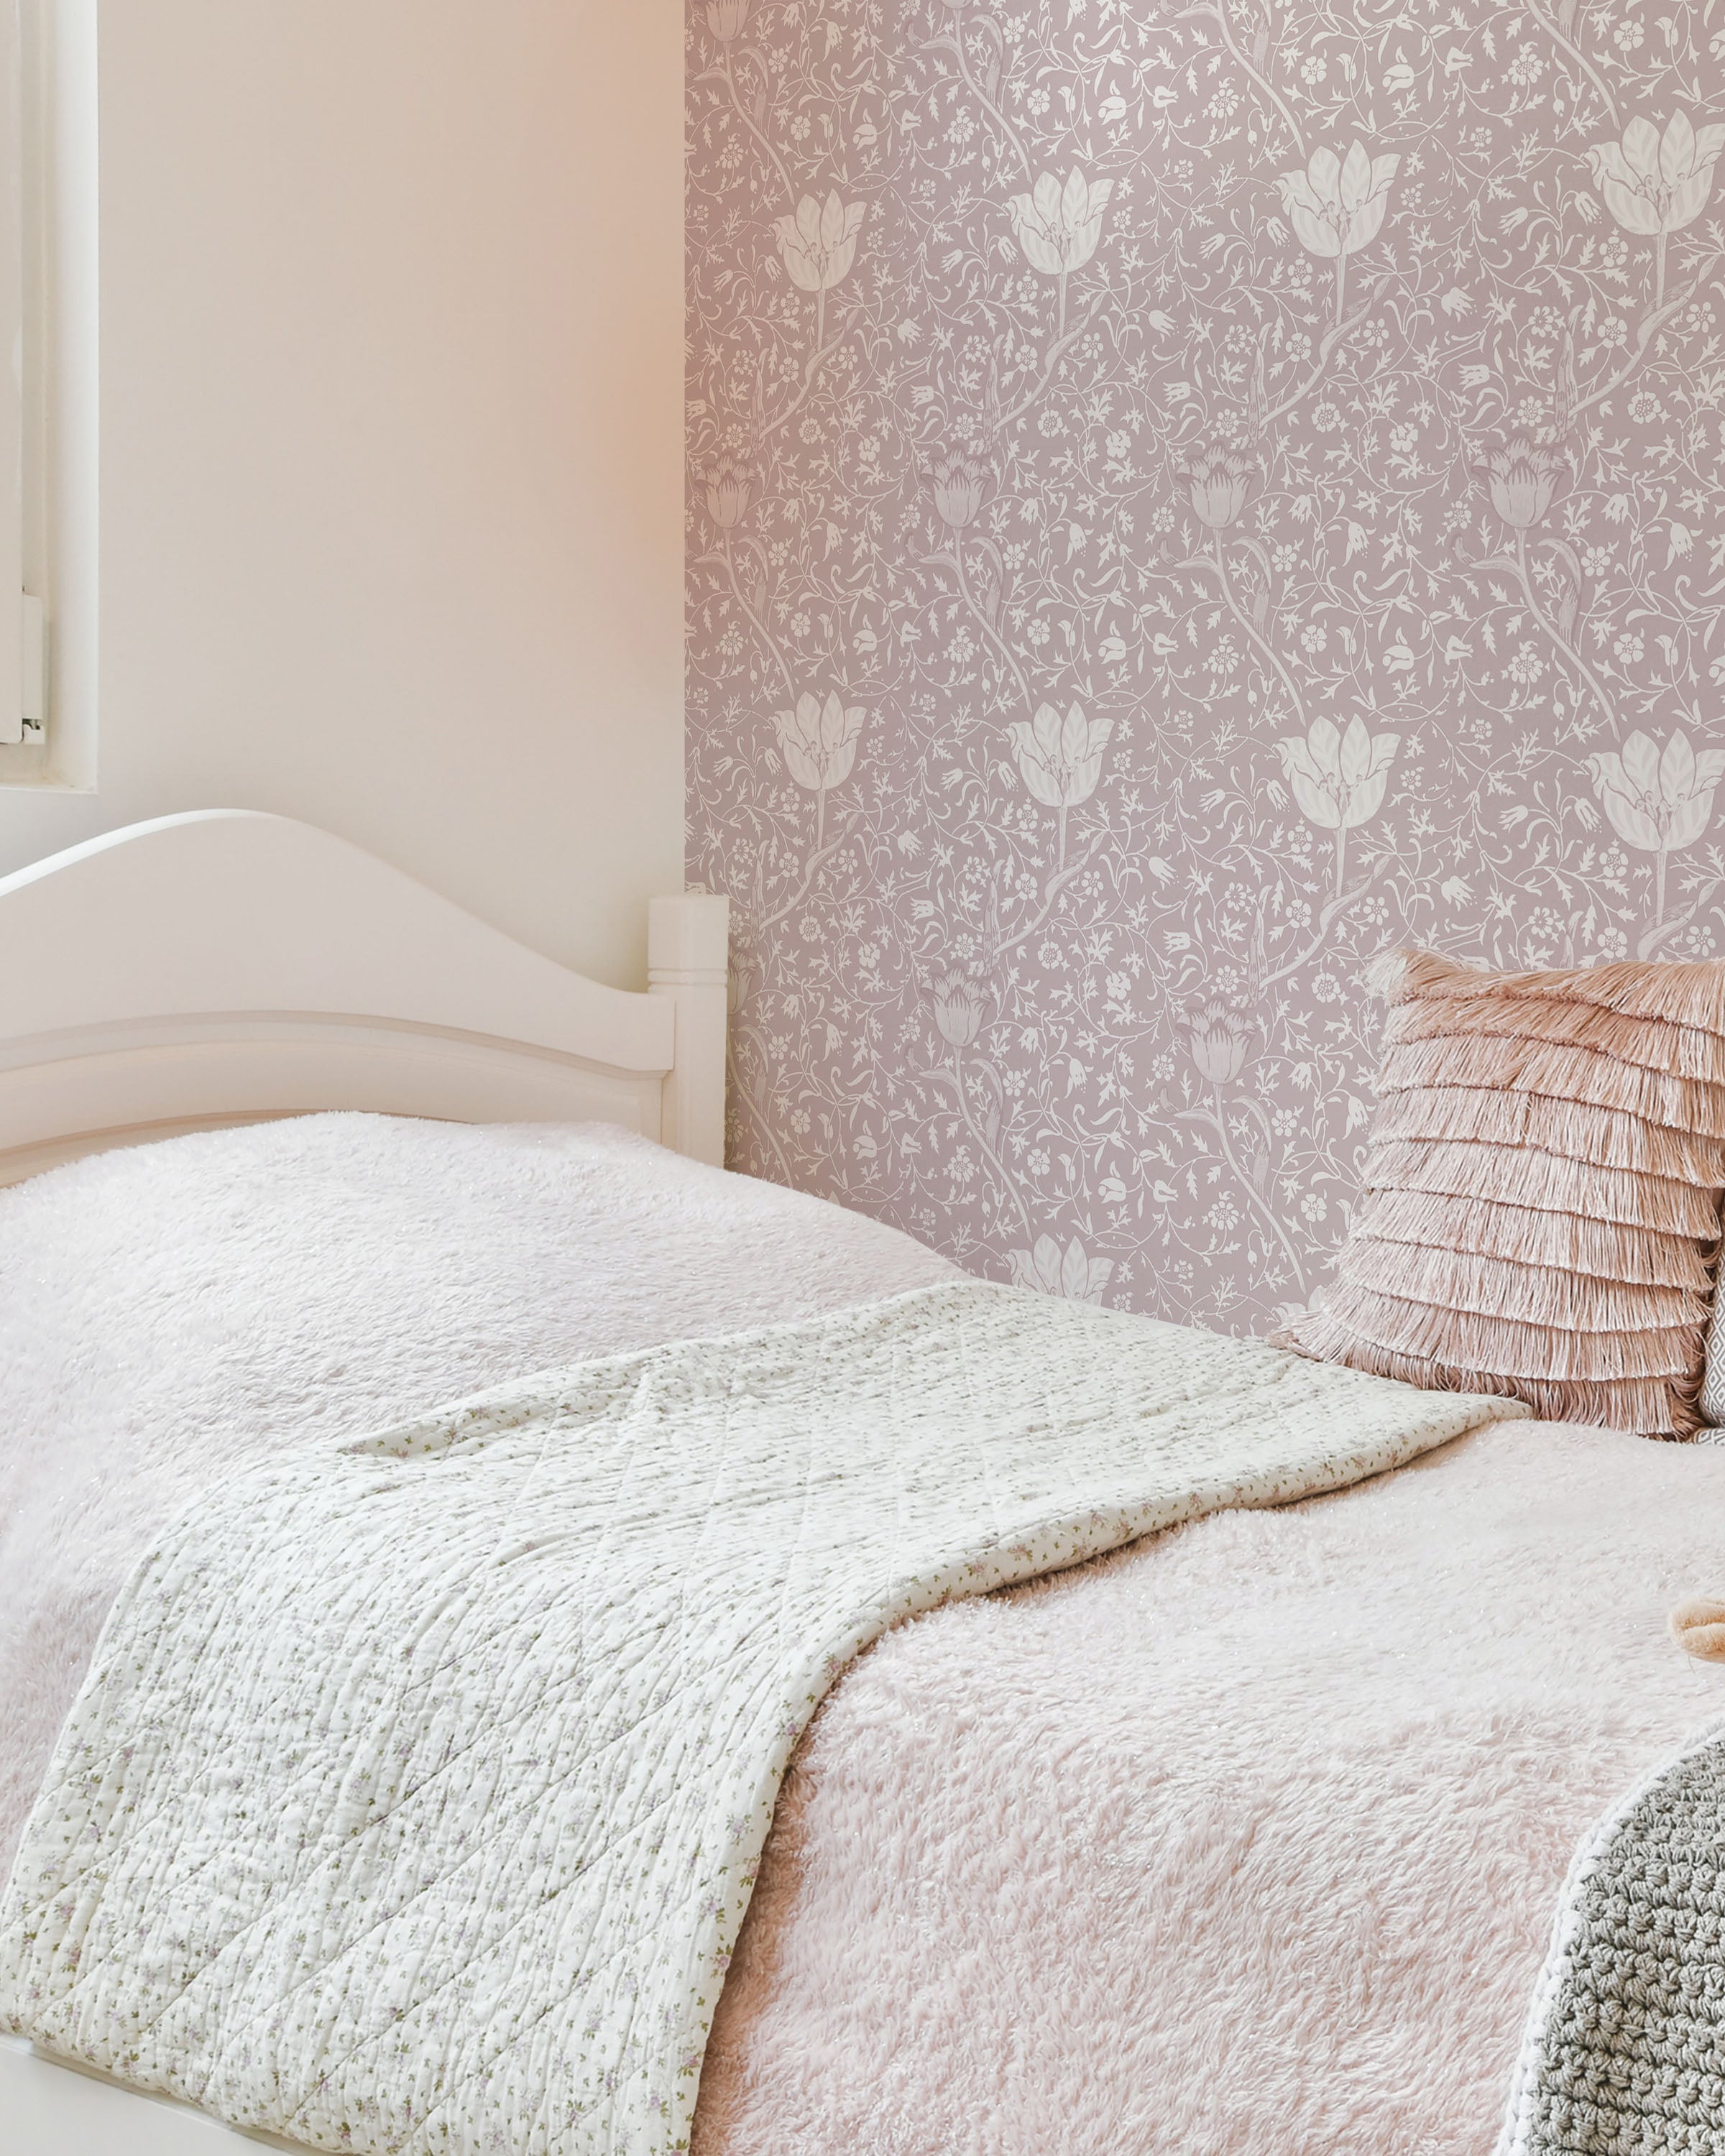 A cozy bedroom corner with a wall covered in Fiona Floral Wallpaper in soft pink with detailed mauve flowers. The room features a white bed with pale pink bedding and a plush gray blanket, creating a warm and inviting atmosphere.